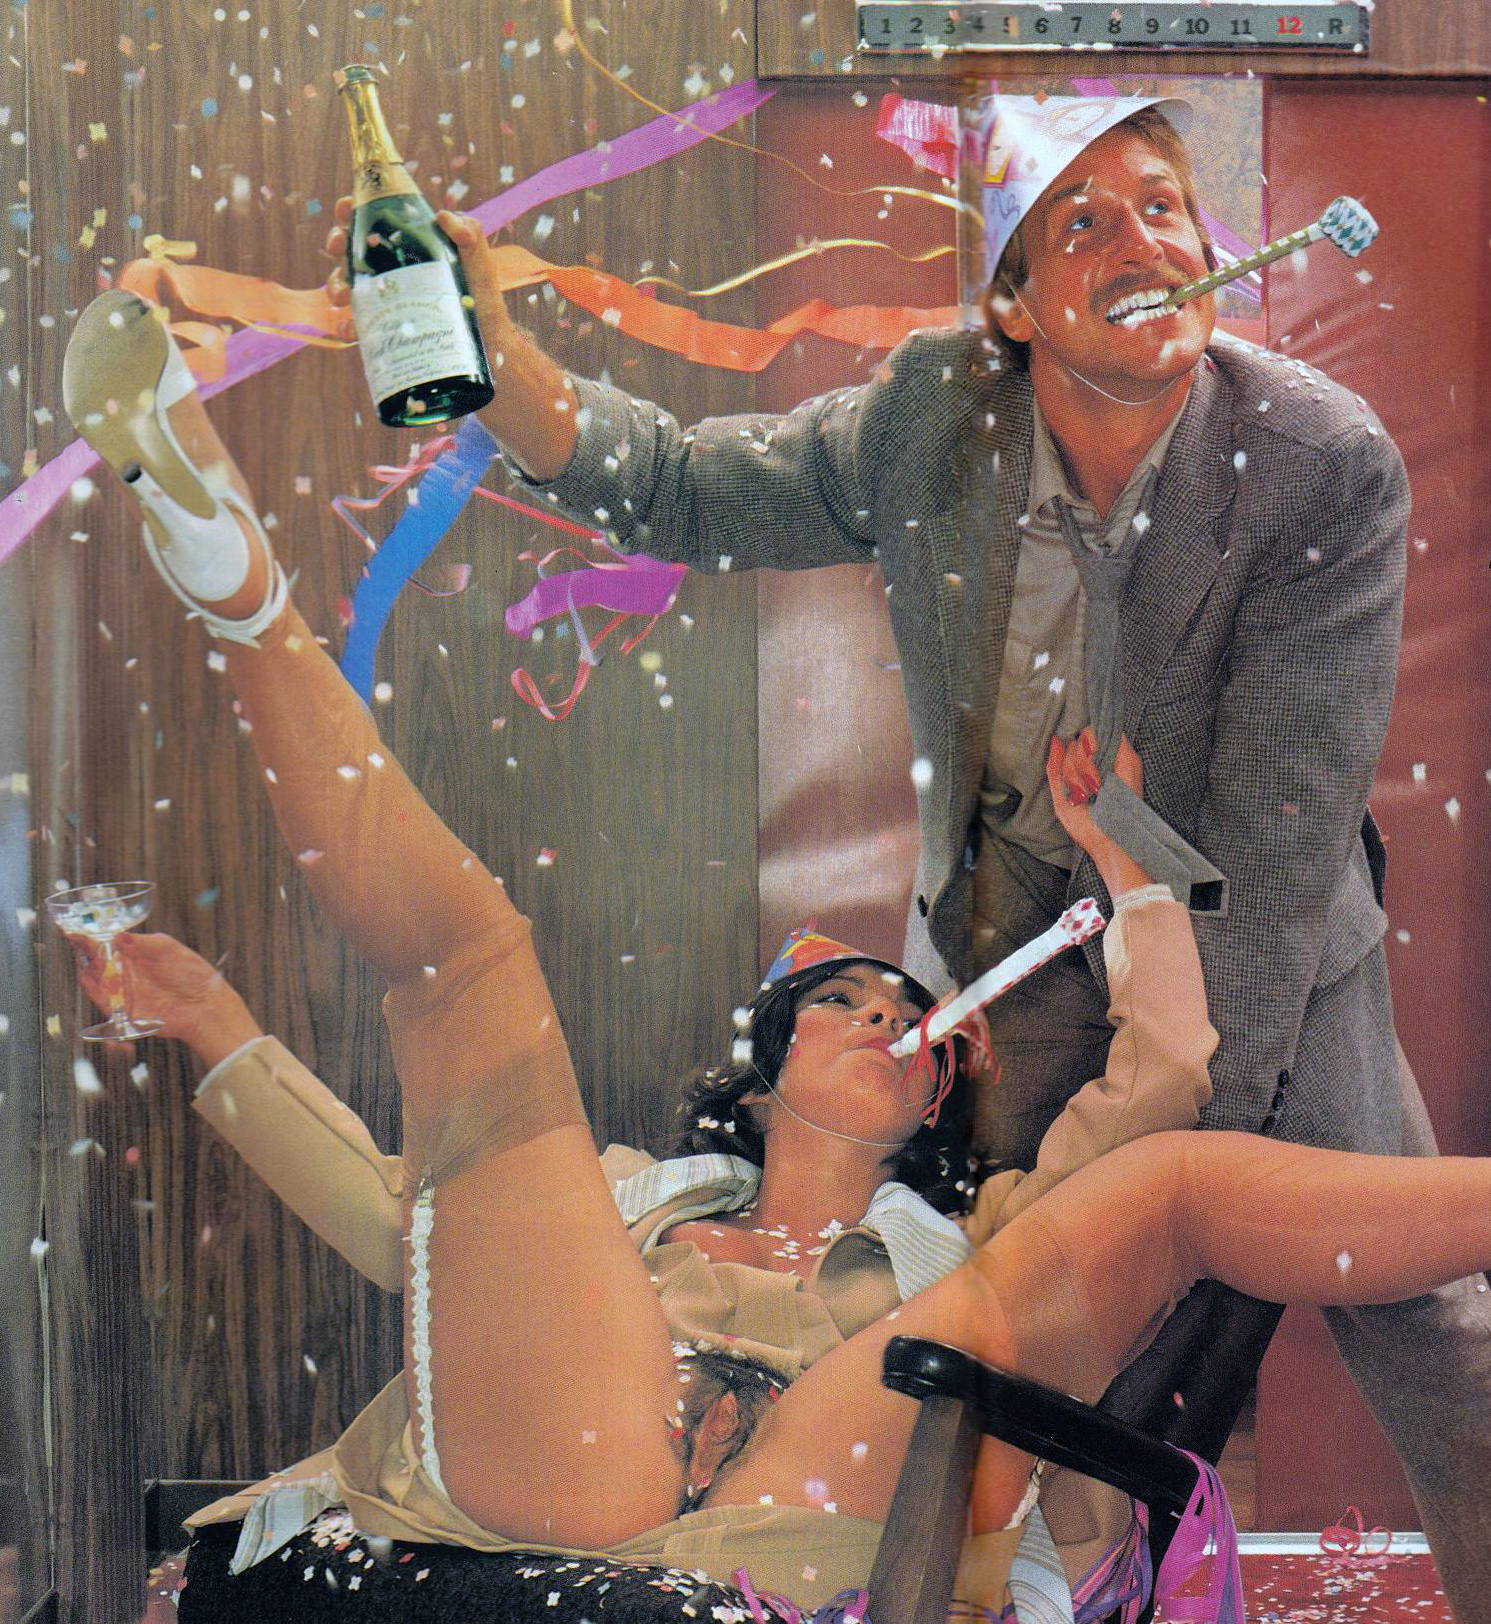 80s Porn Orgy Party - New Year's Eve Office Party Orgy / Hustler Magazine / 1982 â€” Retroâ€”Fucking